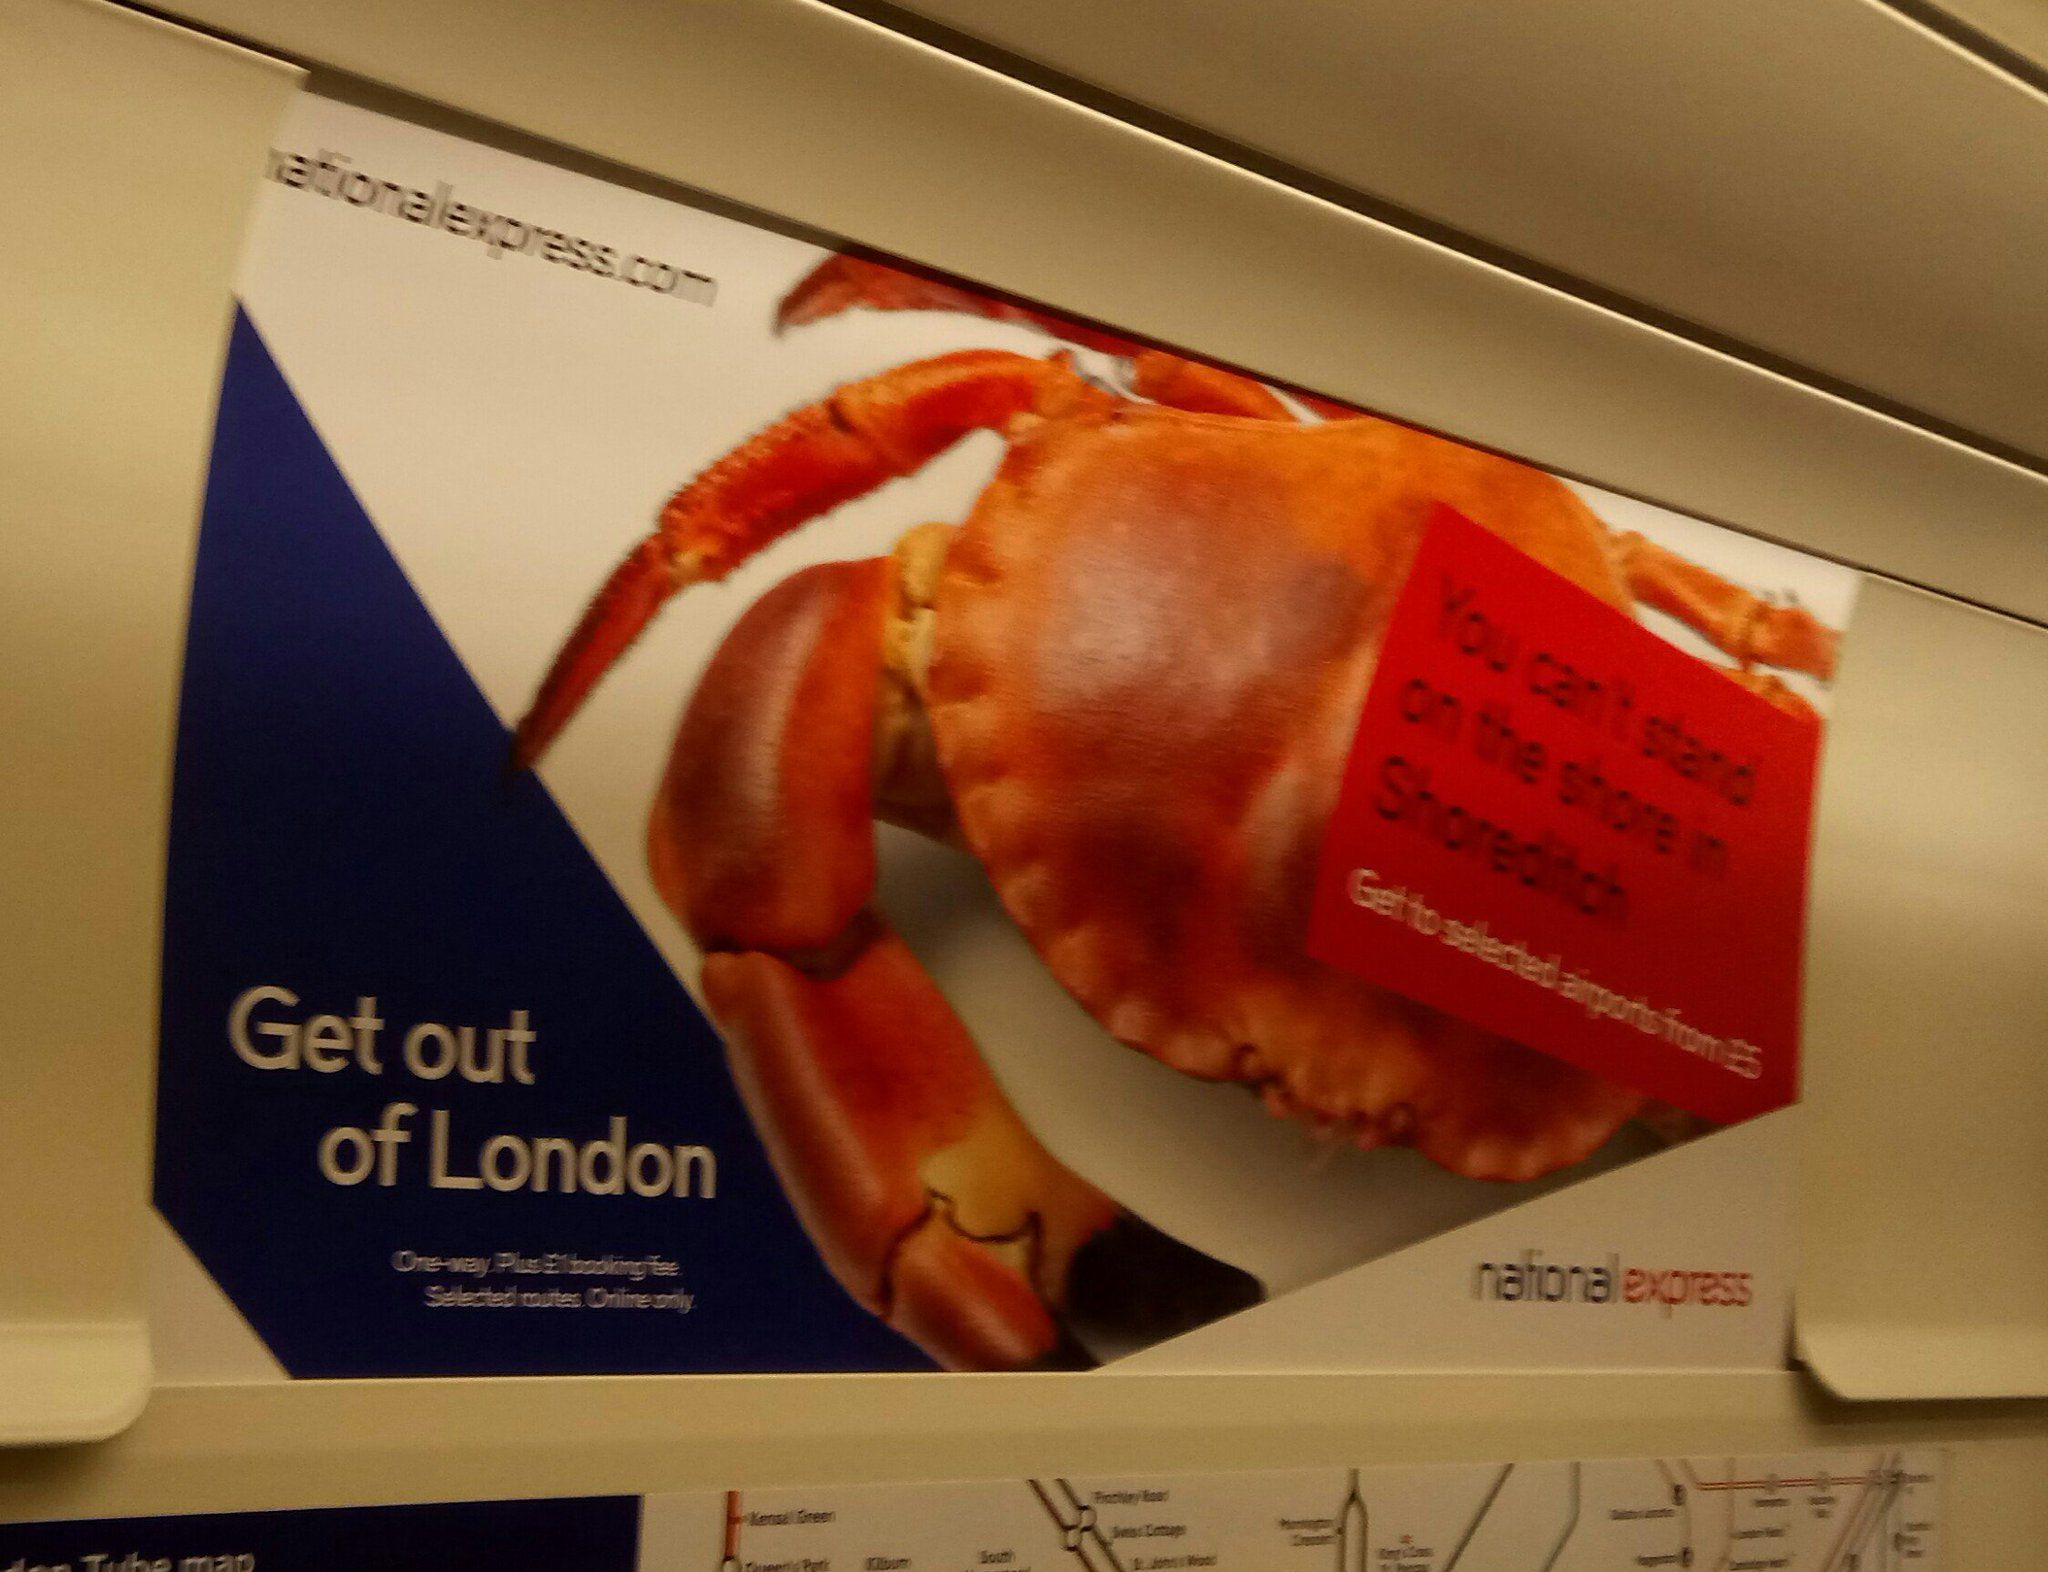 I feel like this crab is threatening me